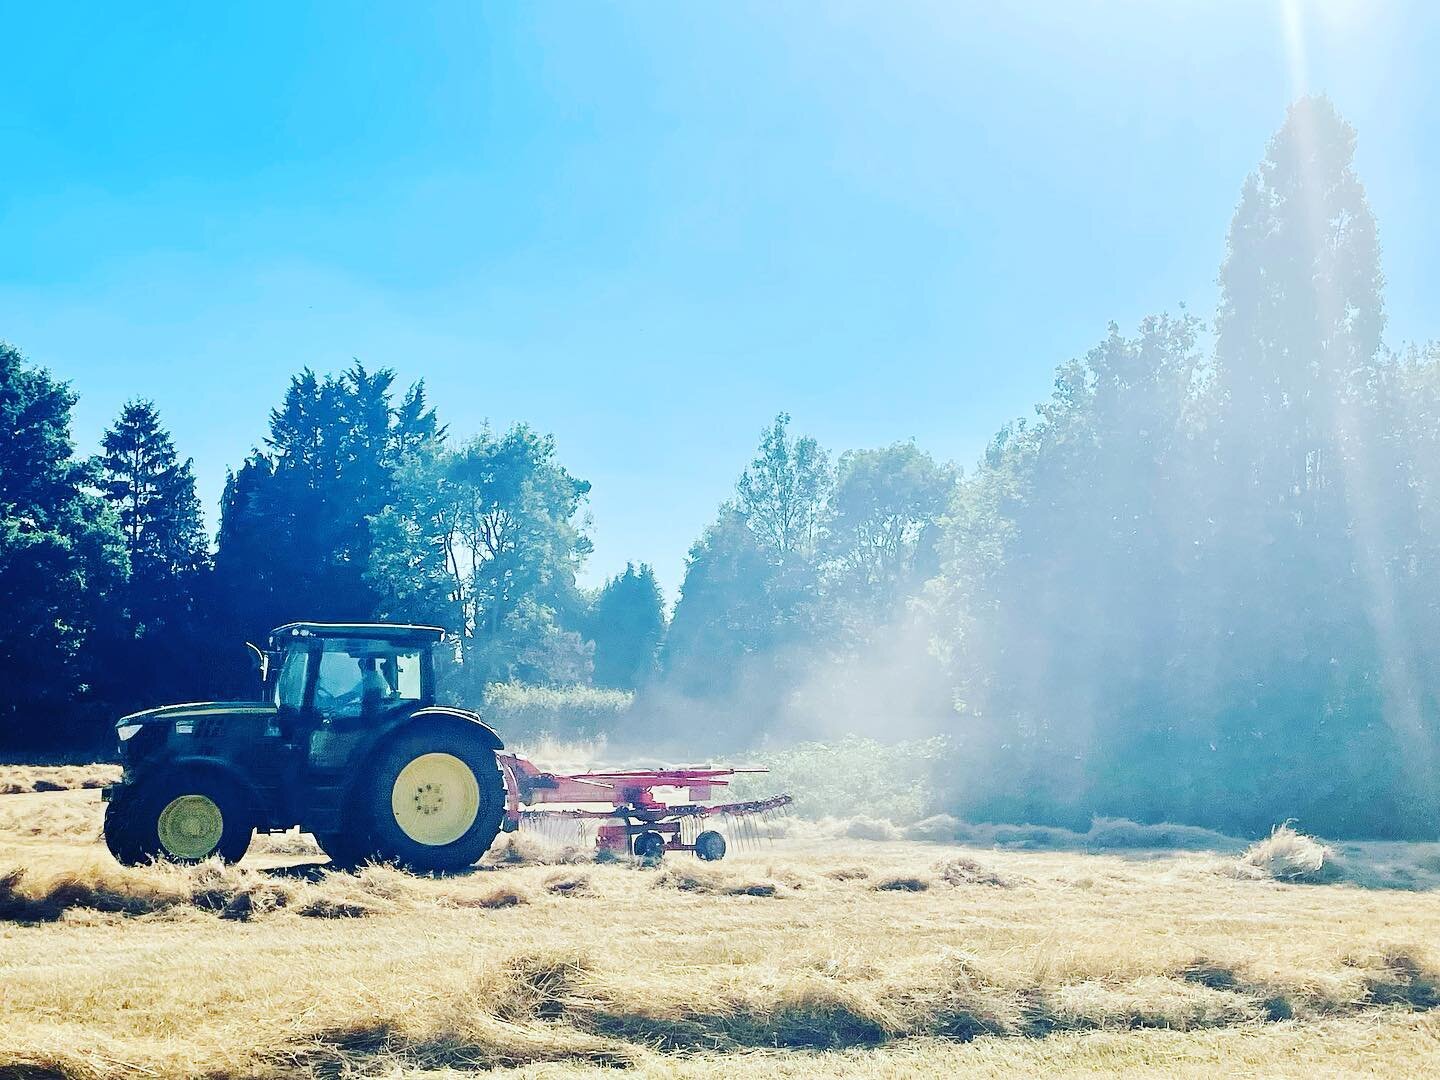 Midway.

Once the hay is cut and baled in early Aug, it brings home that Autumn is around the corner and it&rsquo;s time to adjust medium-term thinking to consideration of winemaking and moving beyond vineyard management.

The native meadows have bee